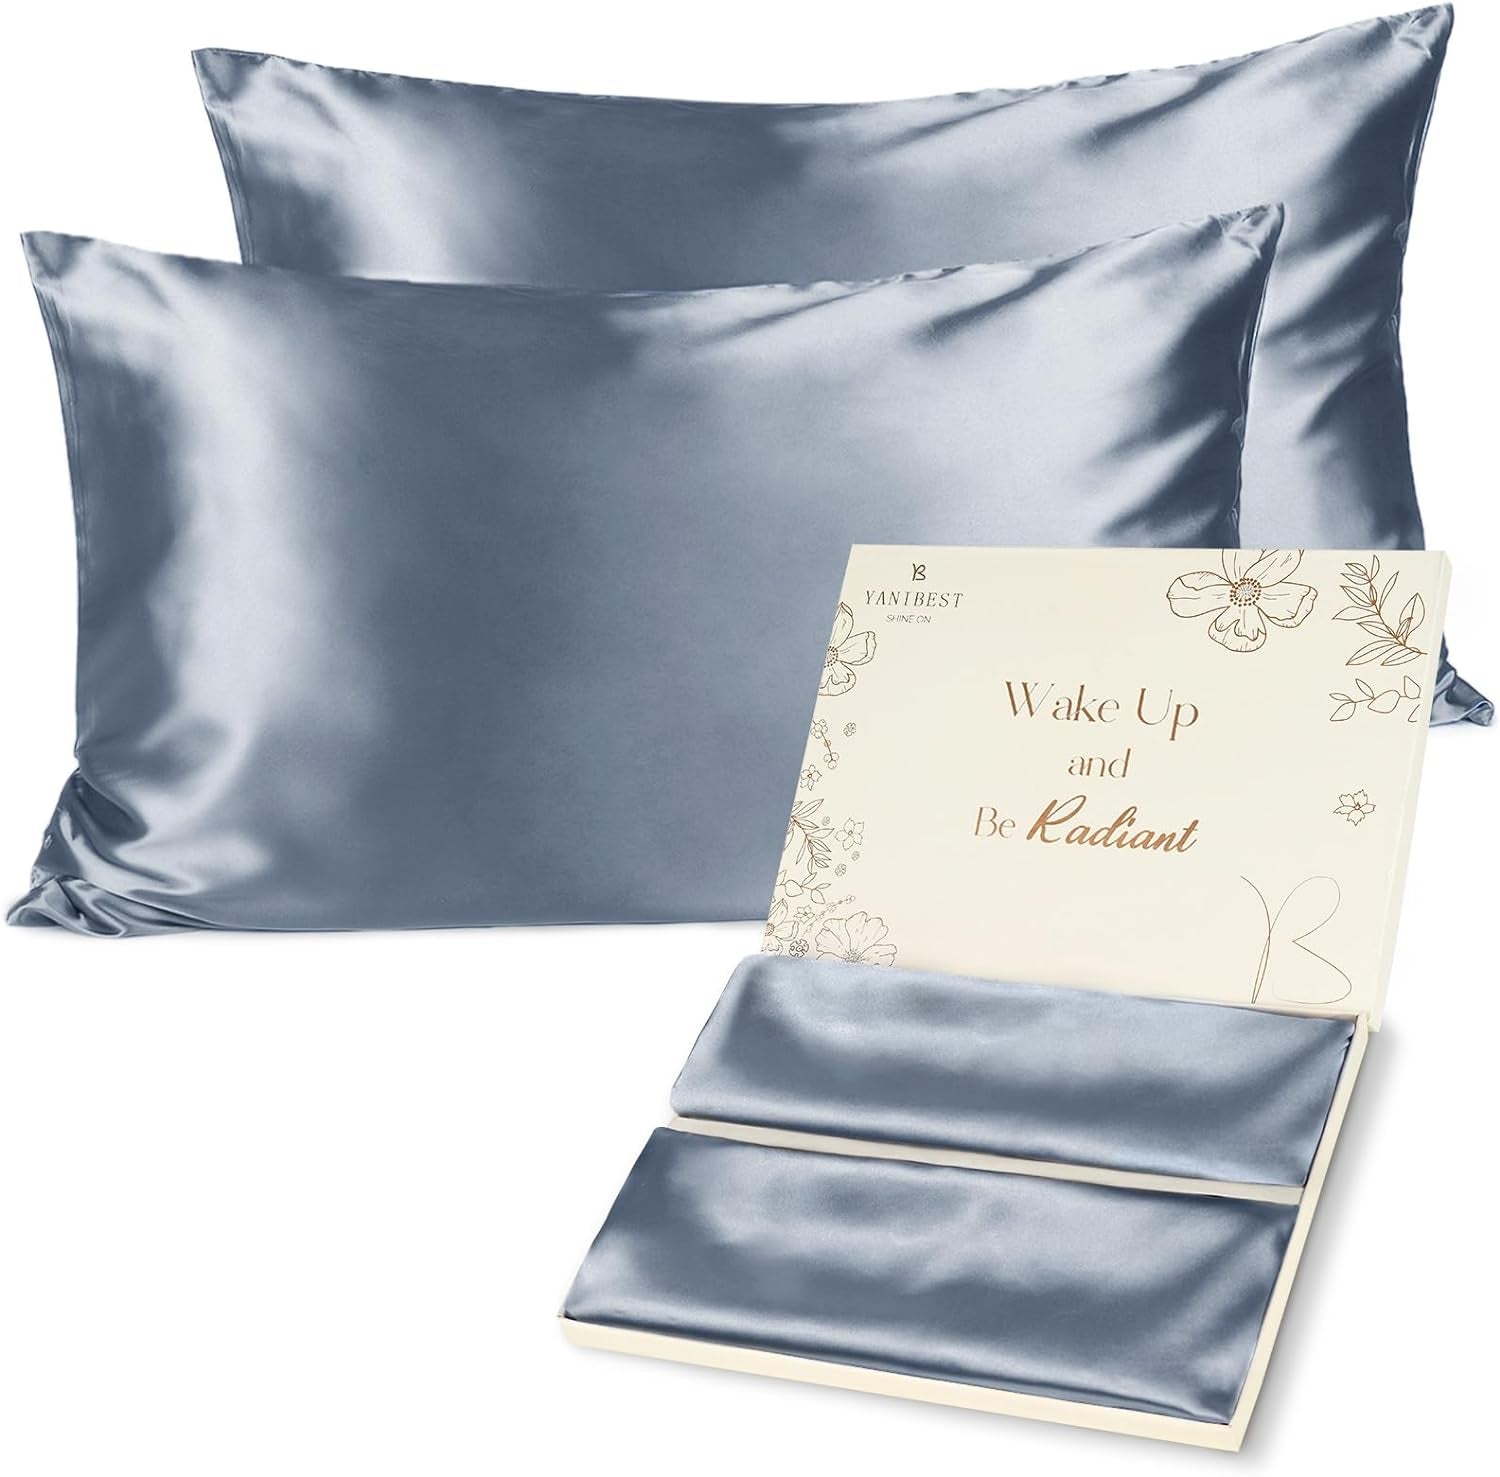 Satin Pillowcase for Hair and Skin - Queen Pillow Cases Set of 2 Pack 20X30 Inches, Super Soft Silky Pillow Case with Zipper, Gifts for Women Men